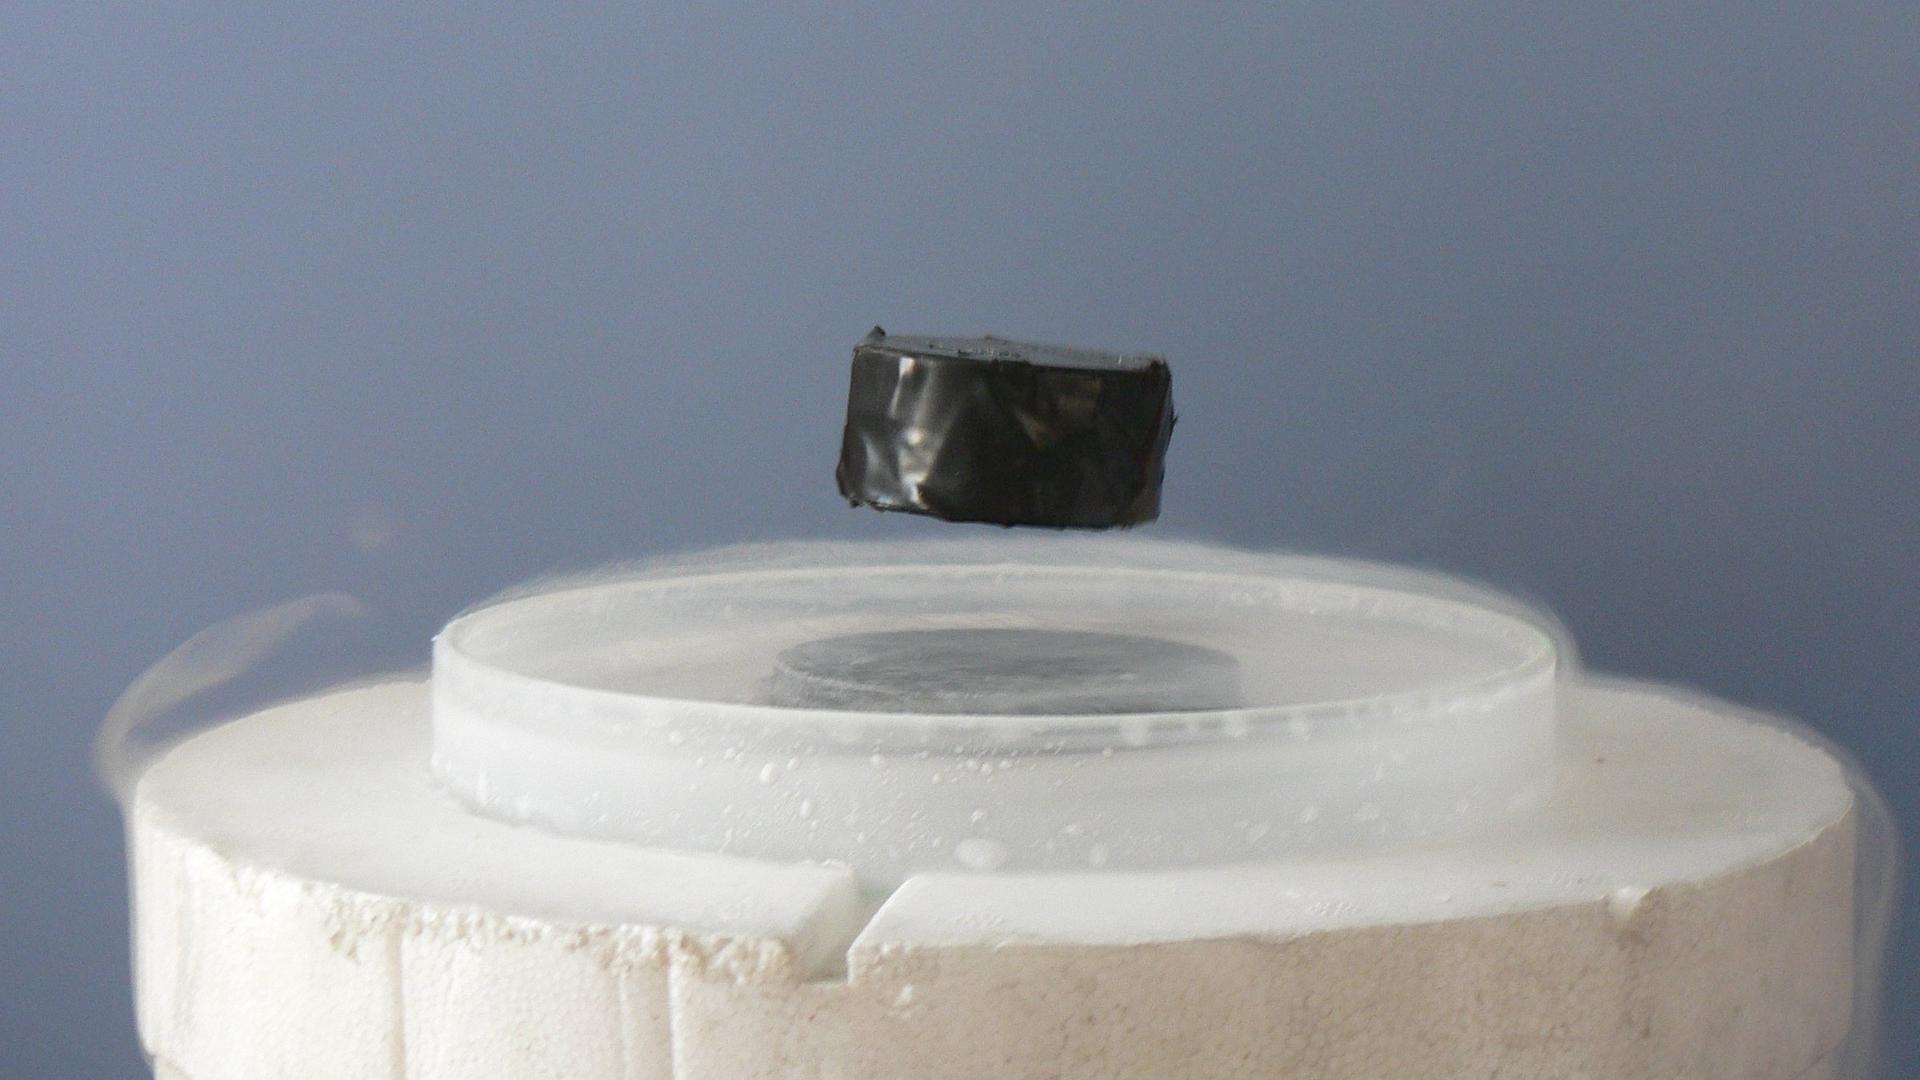 A magnet levitating above a superconductor.